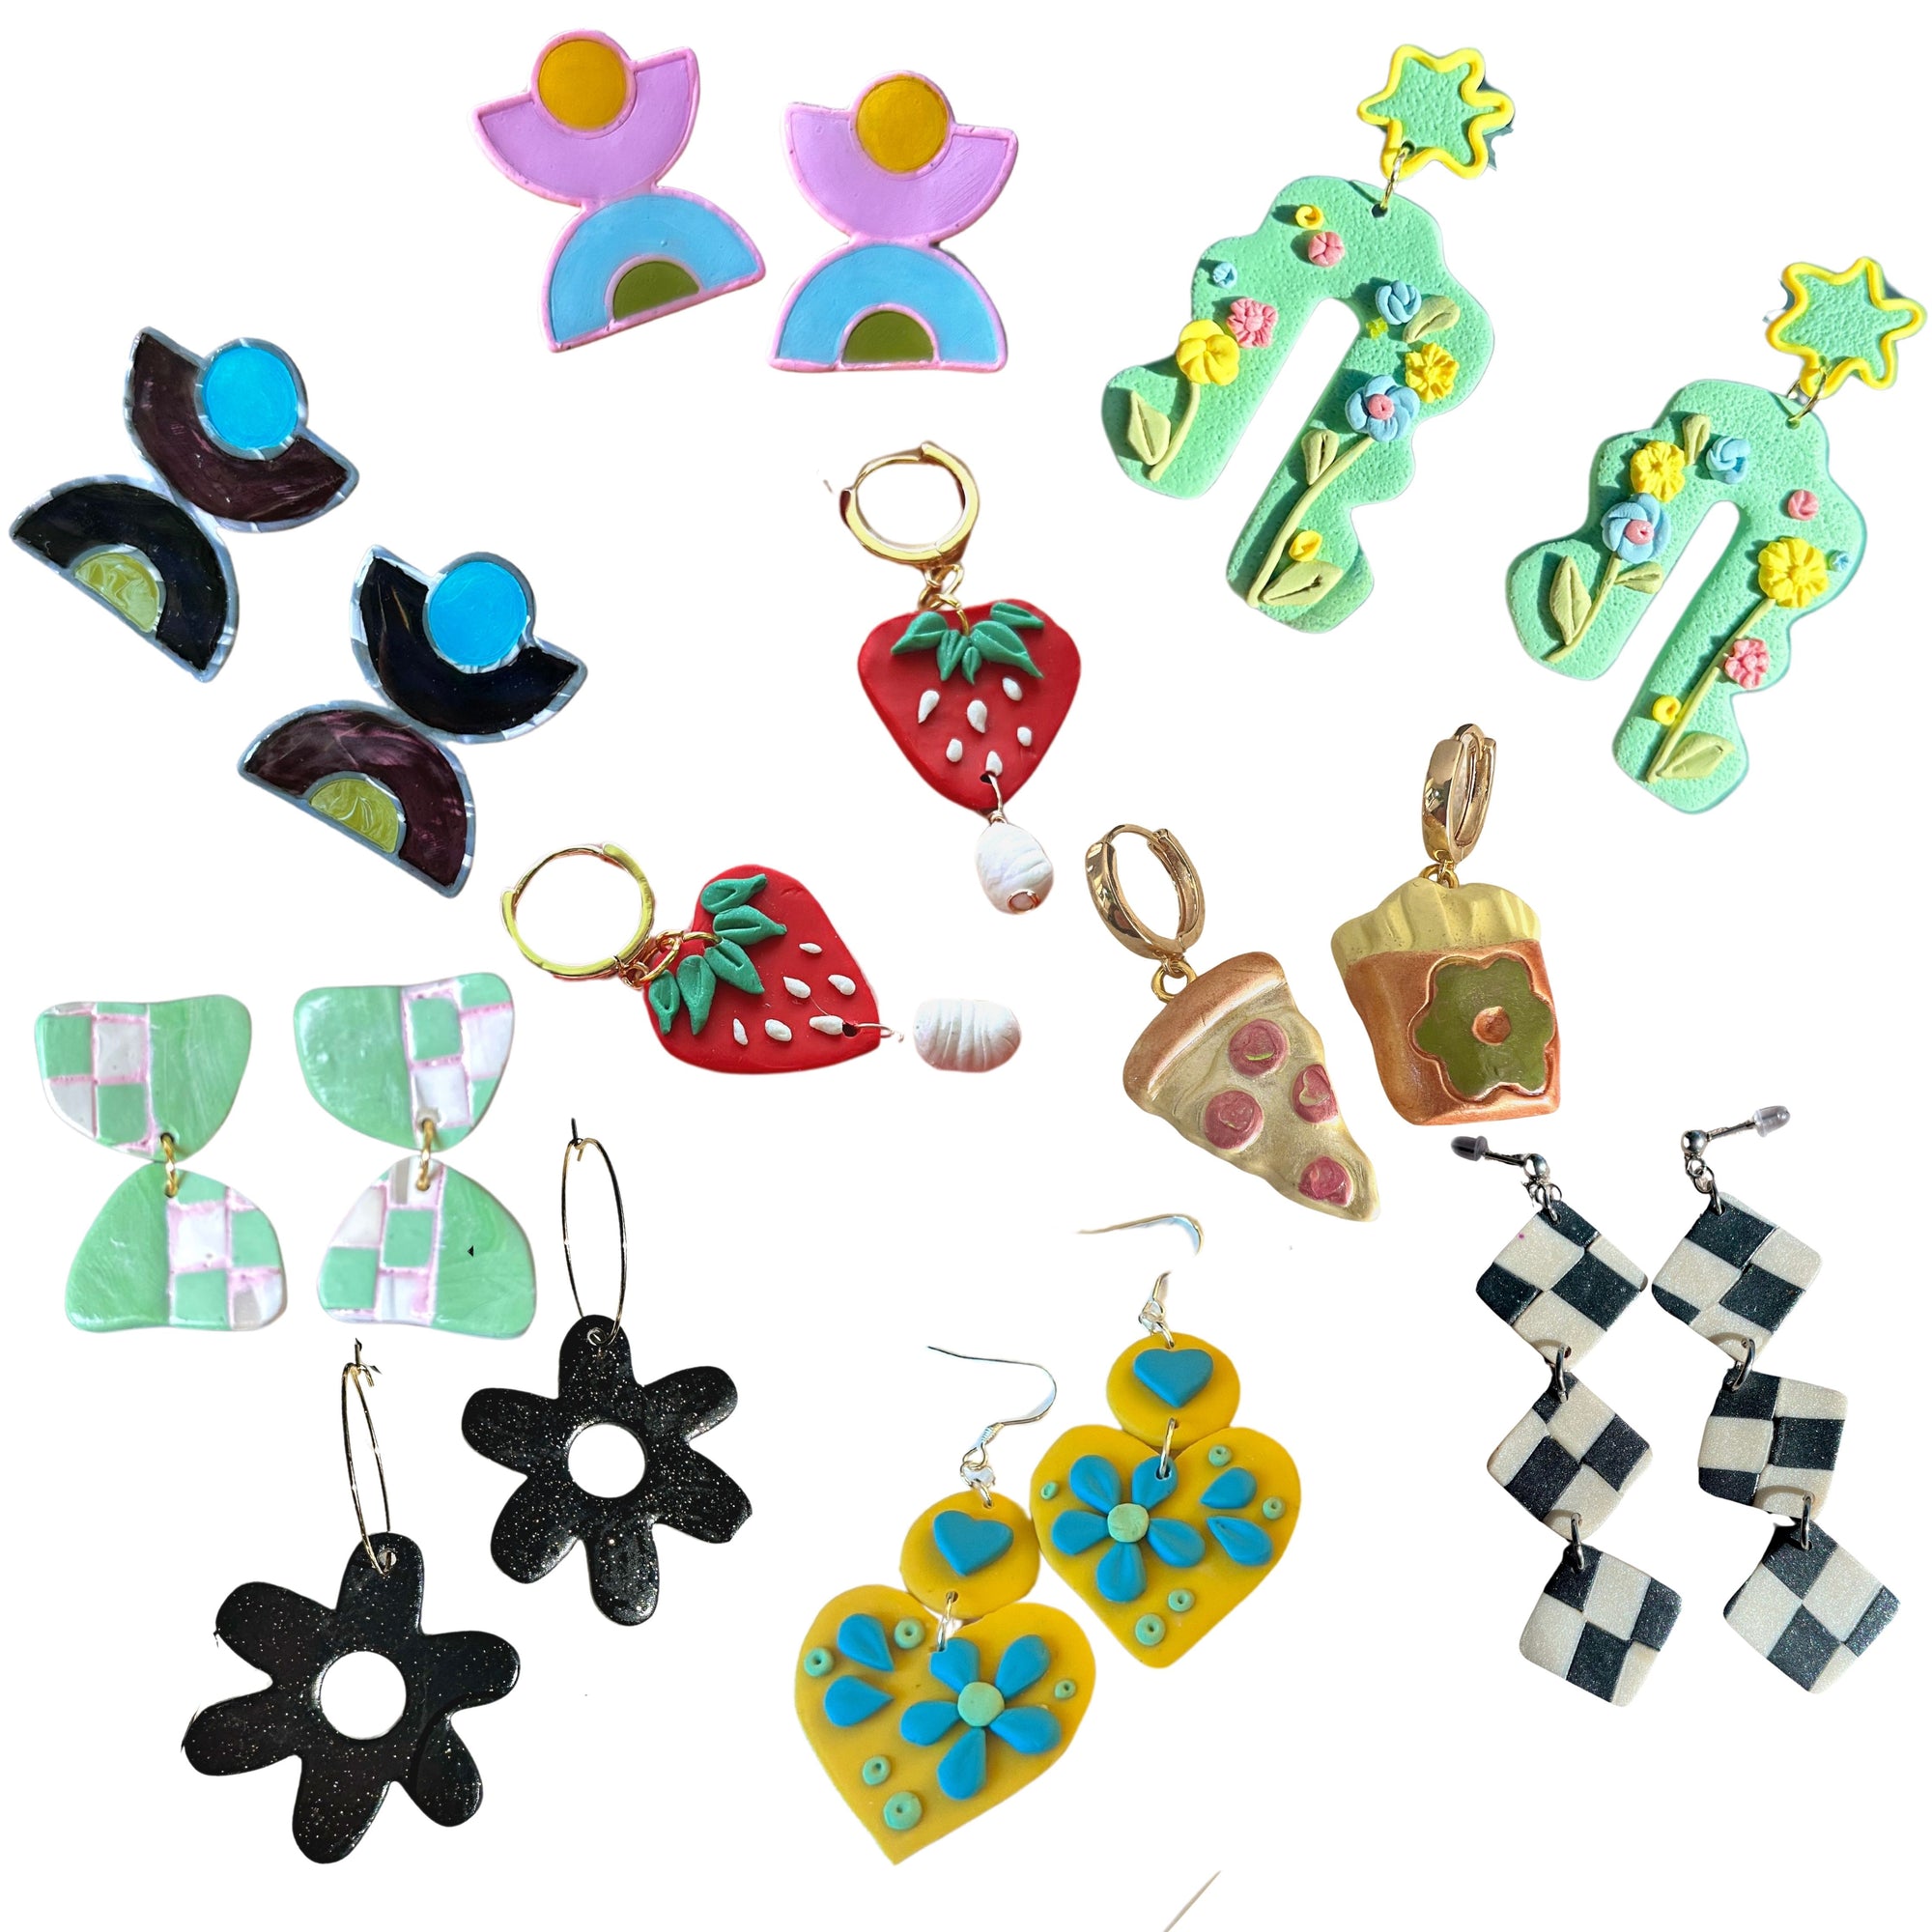 Handmade statement earrings in vibrant colors made with polymer clay